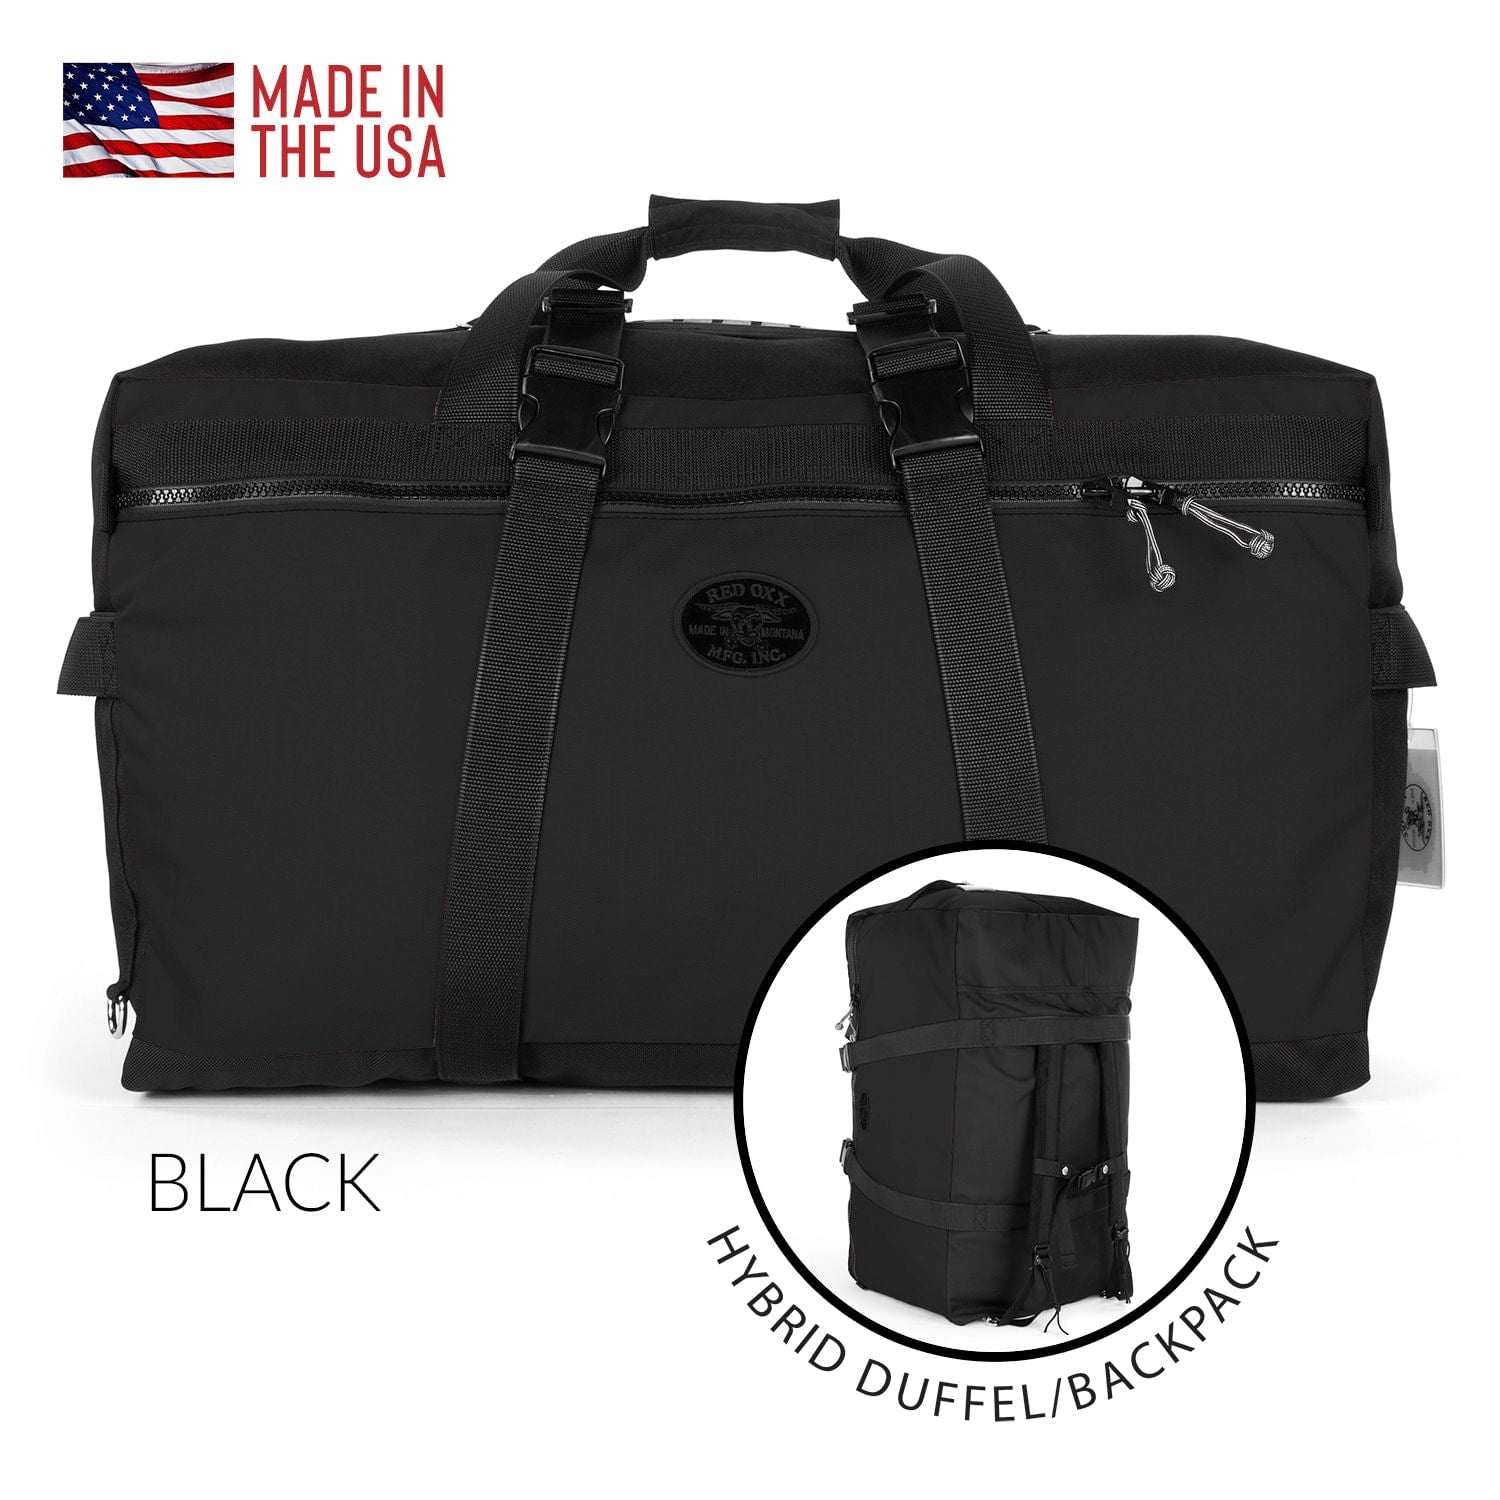 Big Oxx expedition duffel. thirty inches Long x sixteen inches wide x sixteen inches high. 